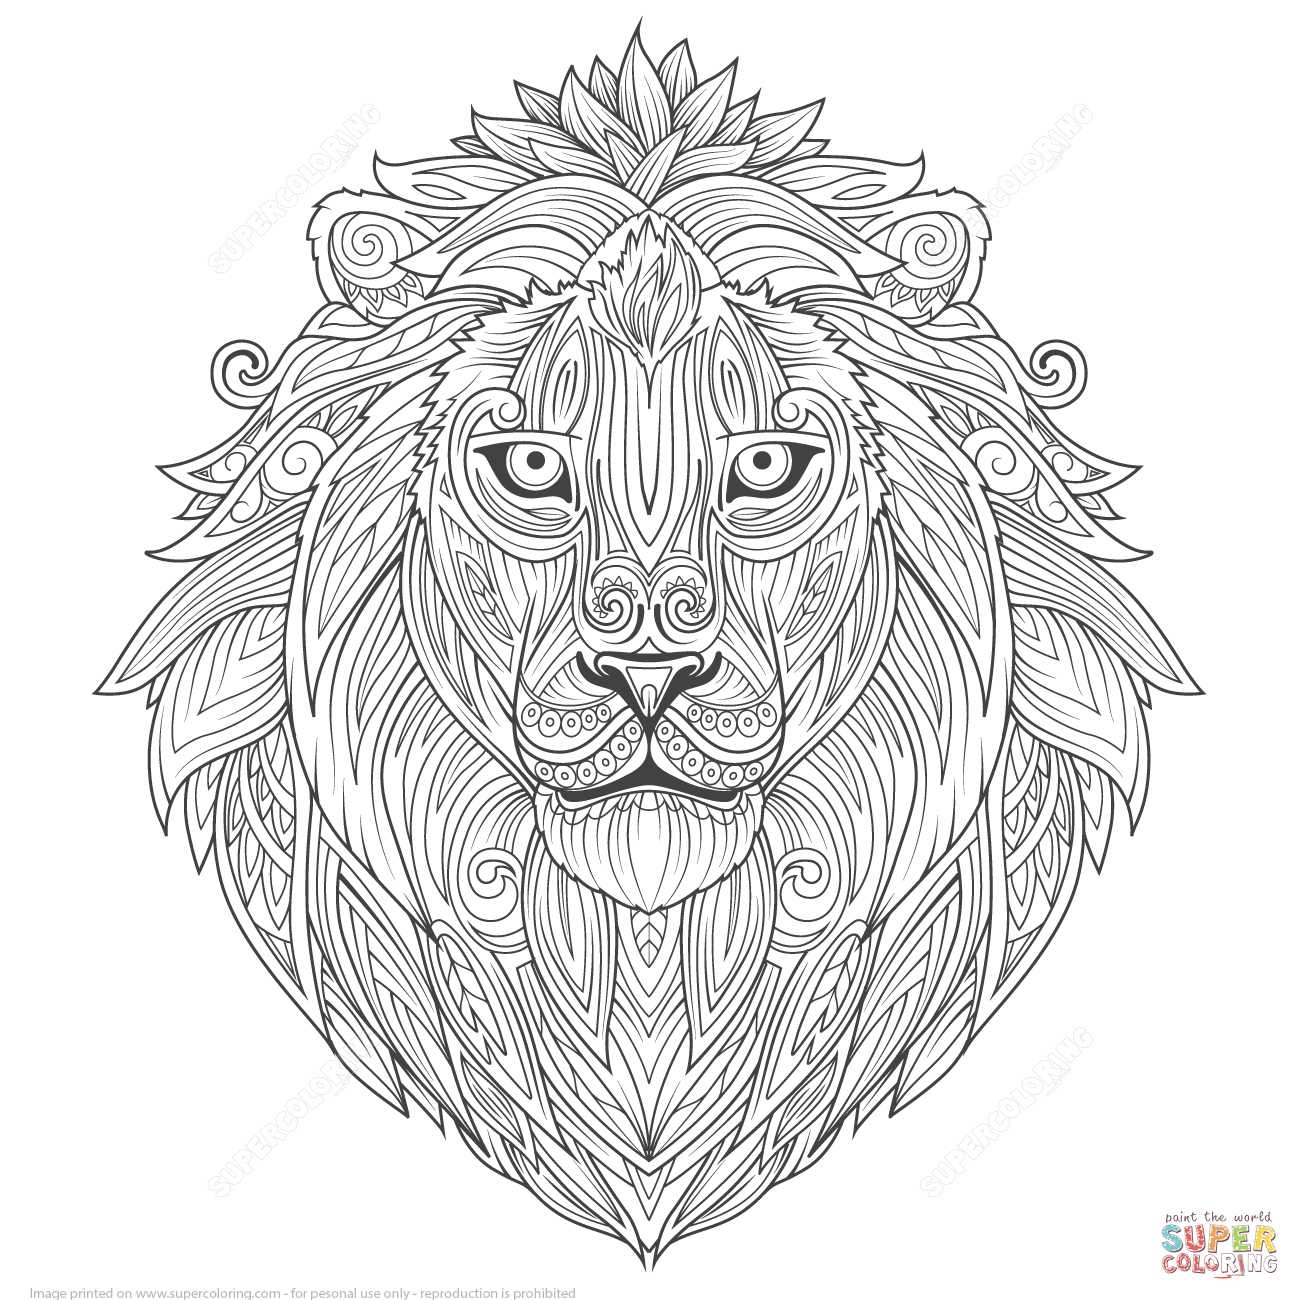 zentangle coloring pages free printable 78 images about zentangle coloring pages on pinterest pages free zentangle coloring printable 